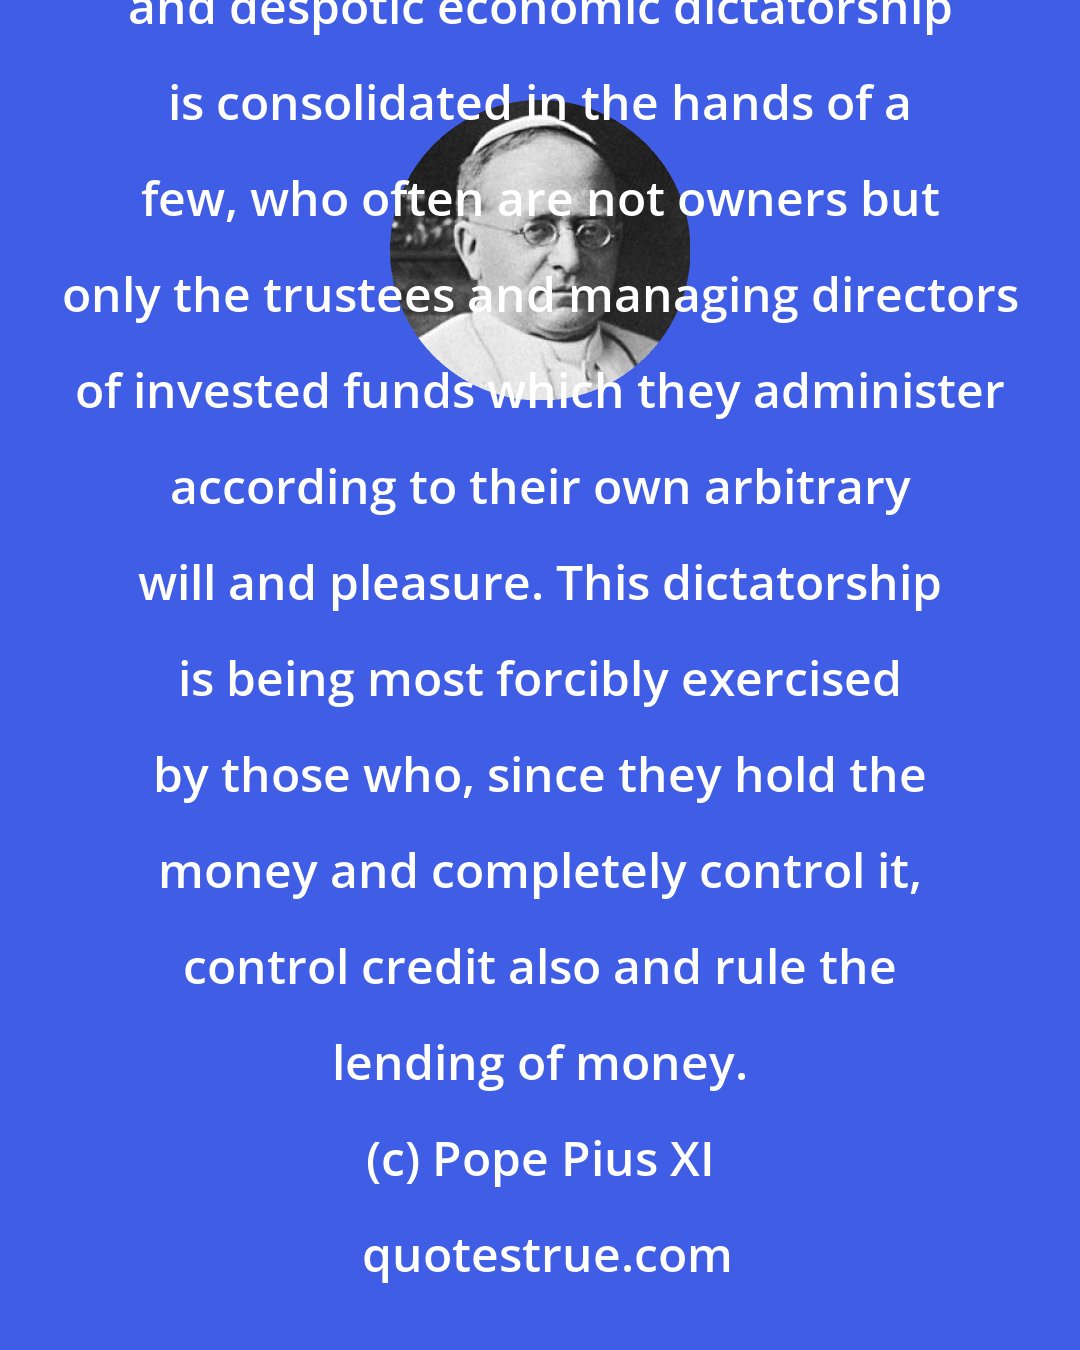 Pope Pius XI: In the first place, it is obvious that not only is wealth concentrated in our times but an immense power and despotic economic dictatorship is consolidated in the hands of a few, who often are not owners but only the trustees and managing directors of invested funds which they administer according to their own arbitrary will and pleasure. This dictatorship is being most forcibly exercised by those who, since they hold the money and completely control it, control credit also and rule the lending of money.